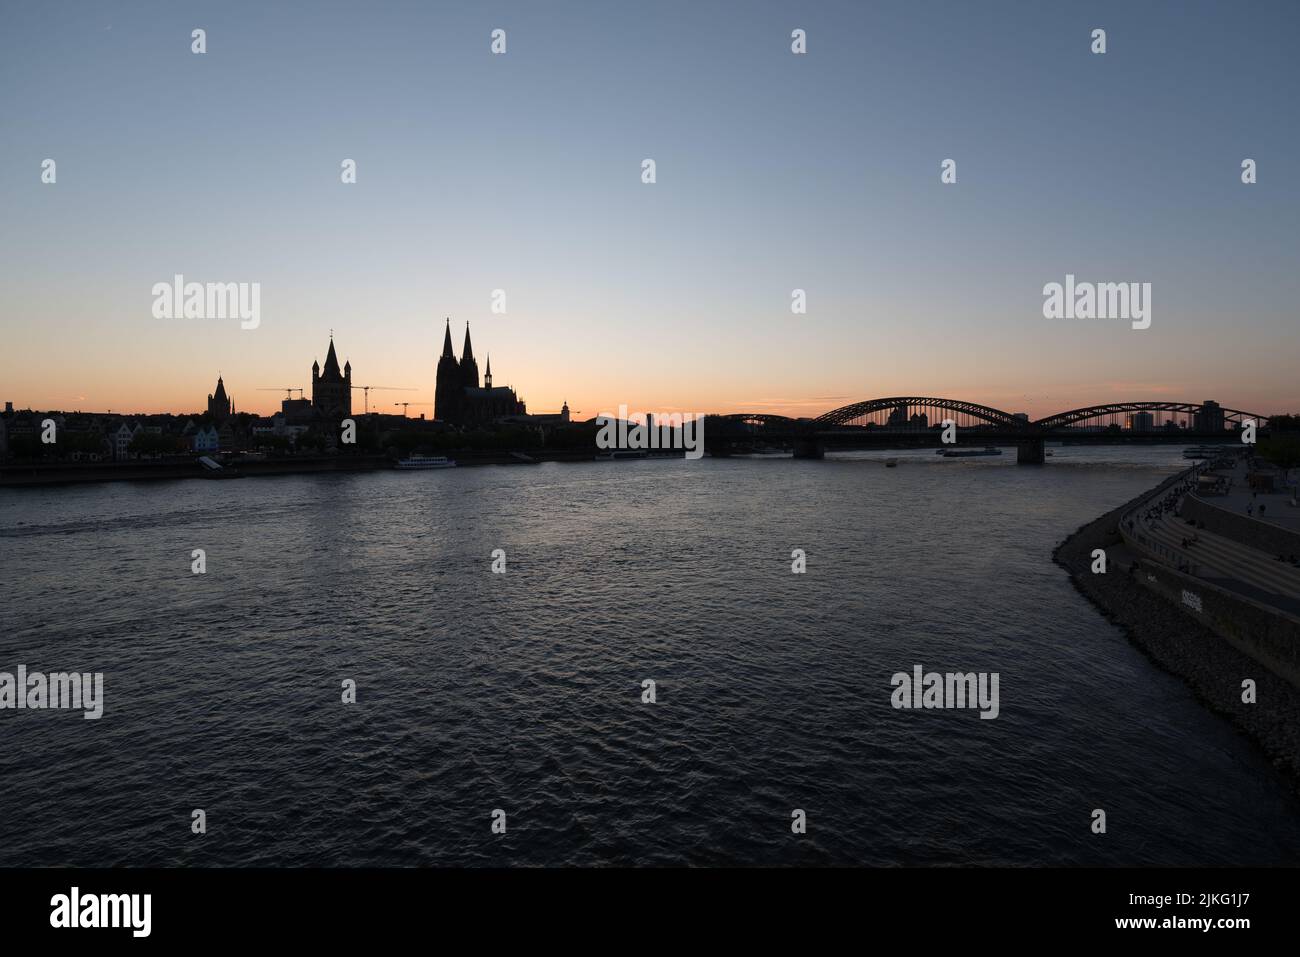 02.06.2022, Germany, North Rhine-Westphalia, Cologne - Silhouette of the old town of Cologne in the evening with the Cologne Cathedral, the Hohenzolle Stock Photo